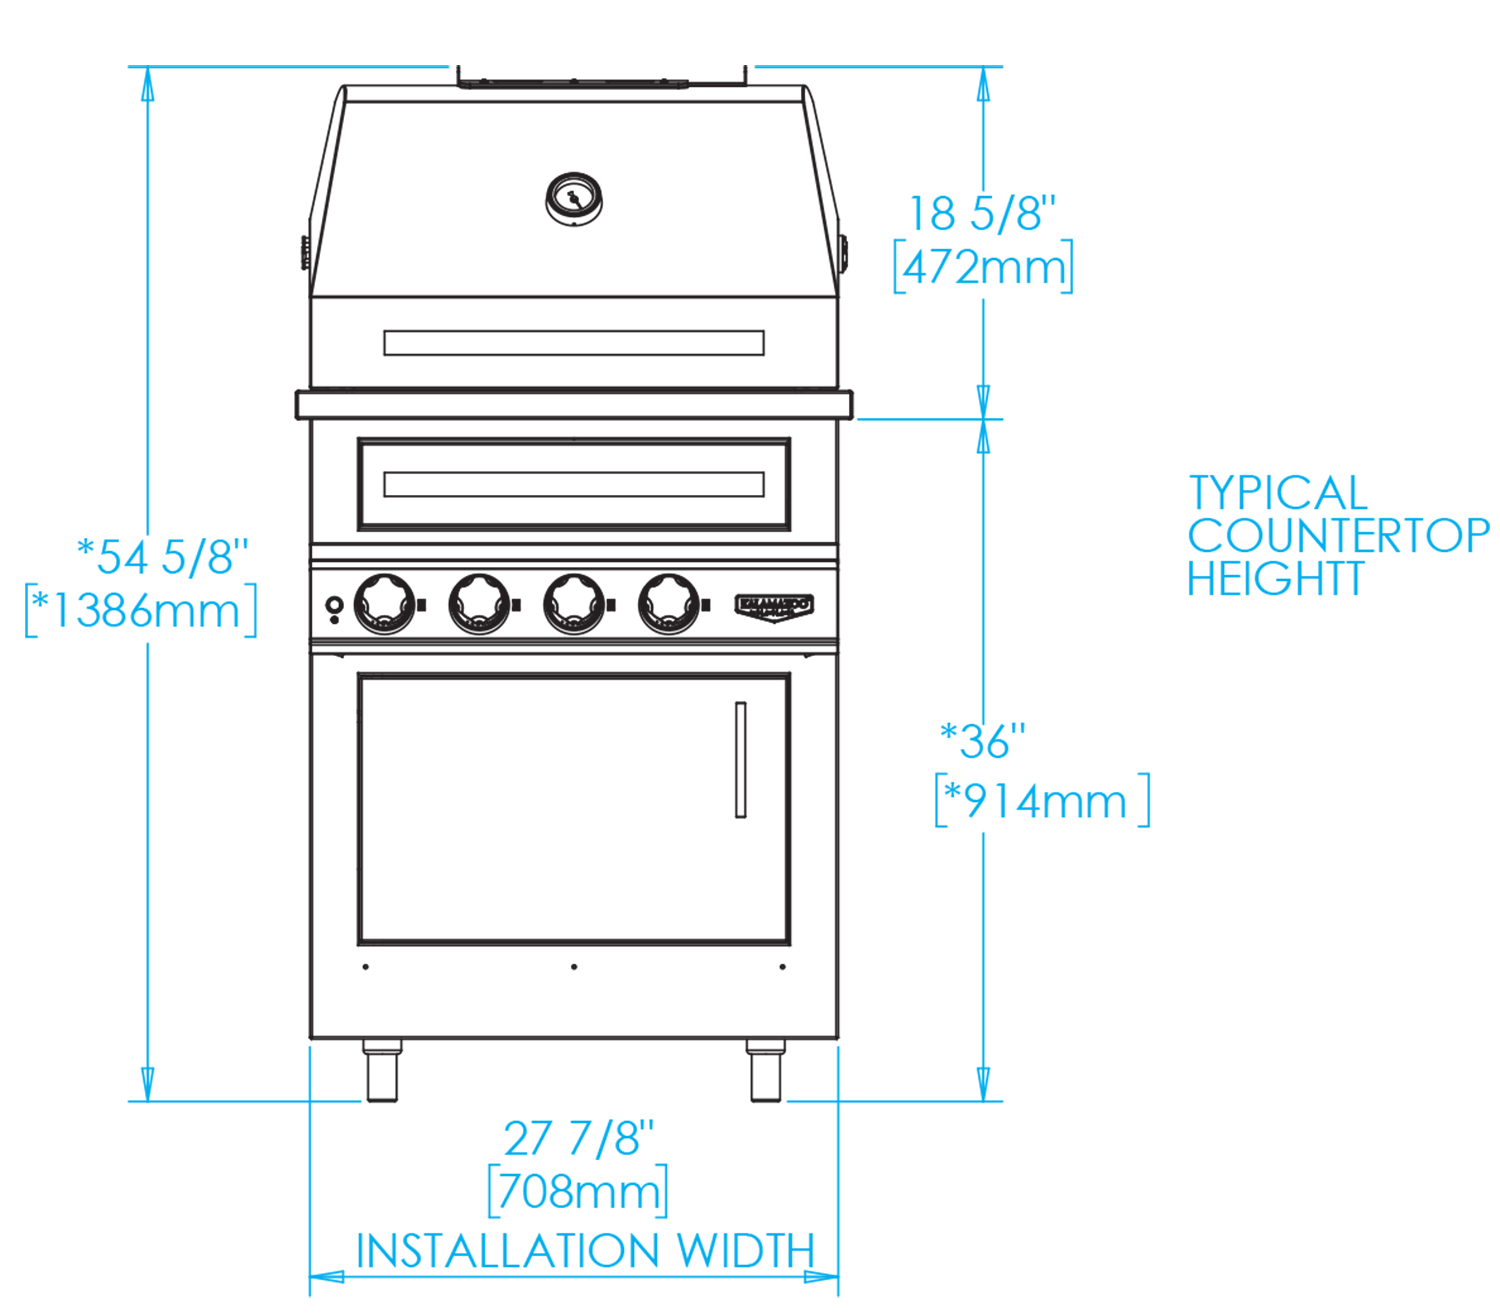 K500HB Built-in Hybrid Fire Grill Dimensions Image